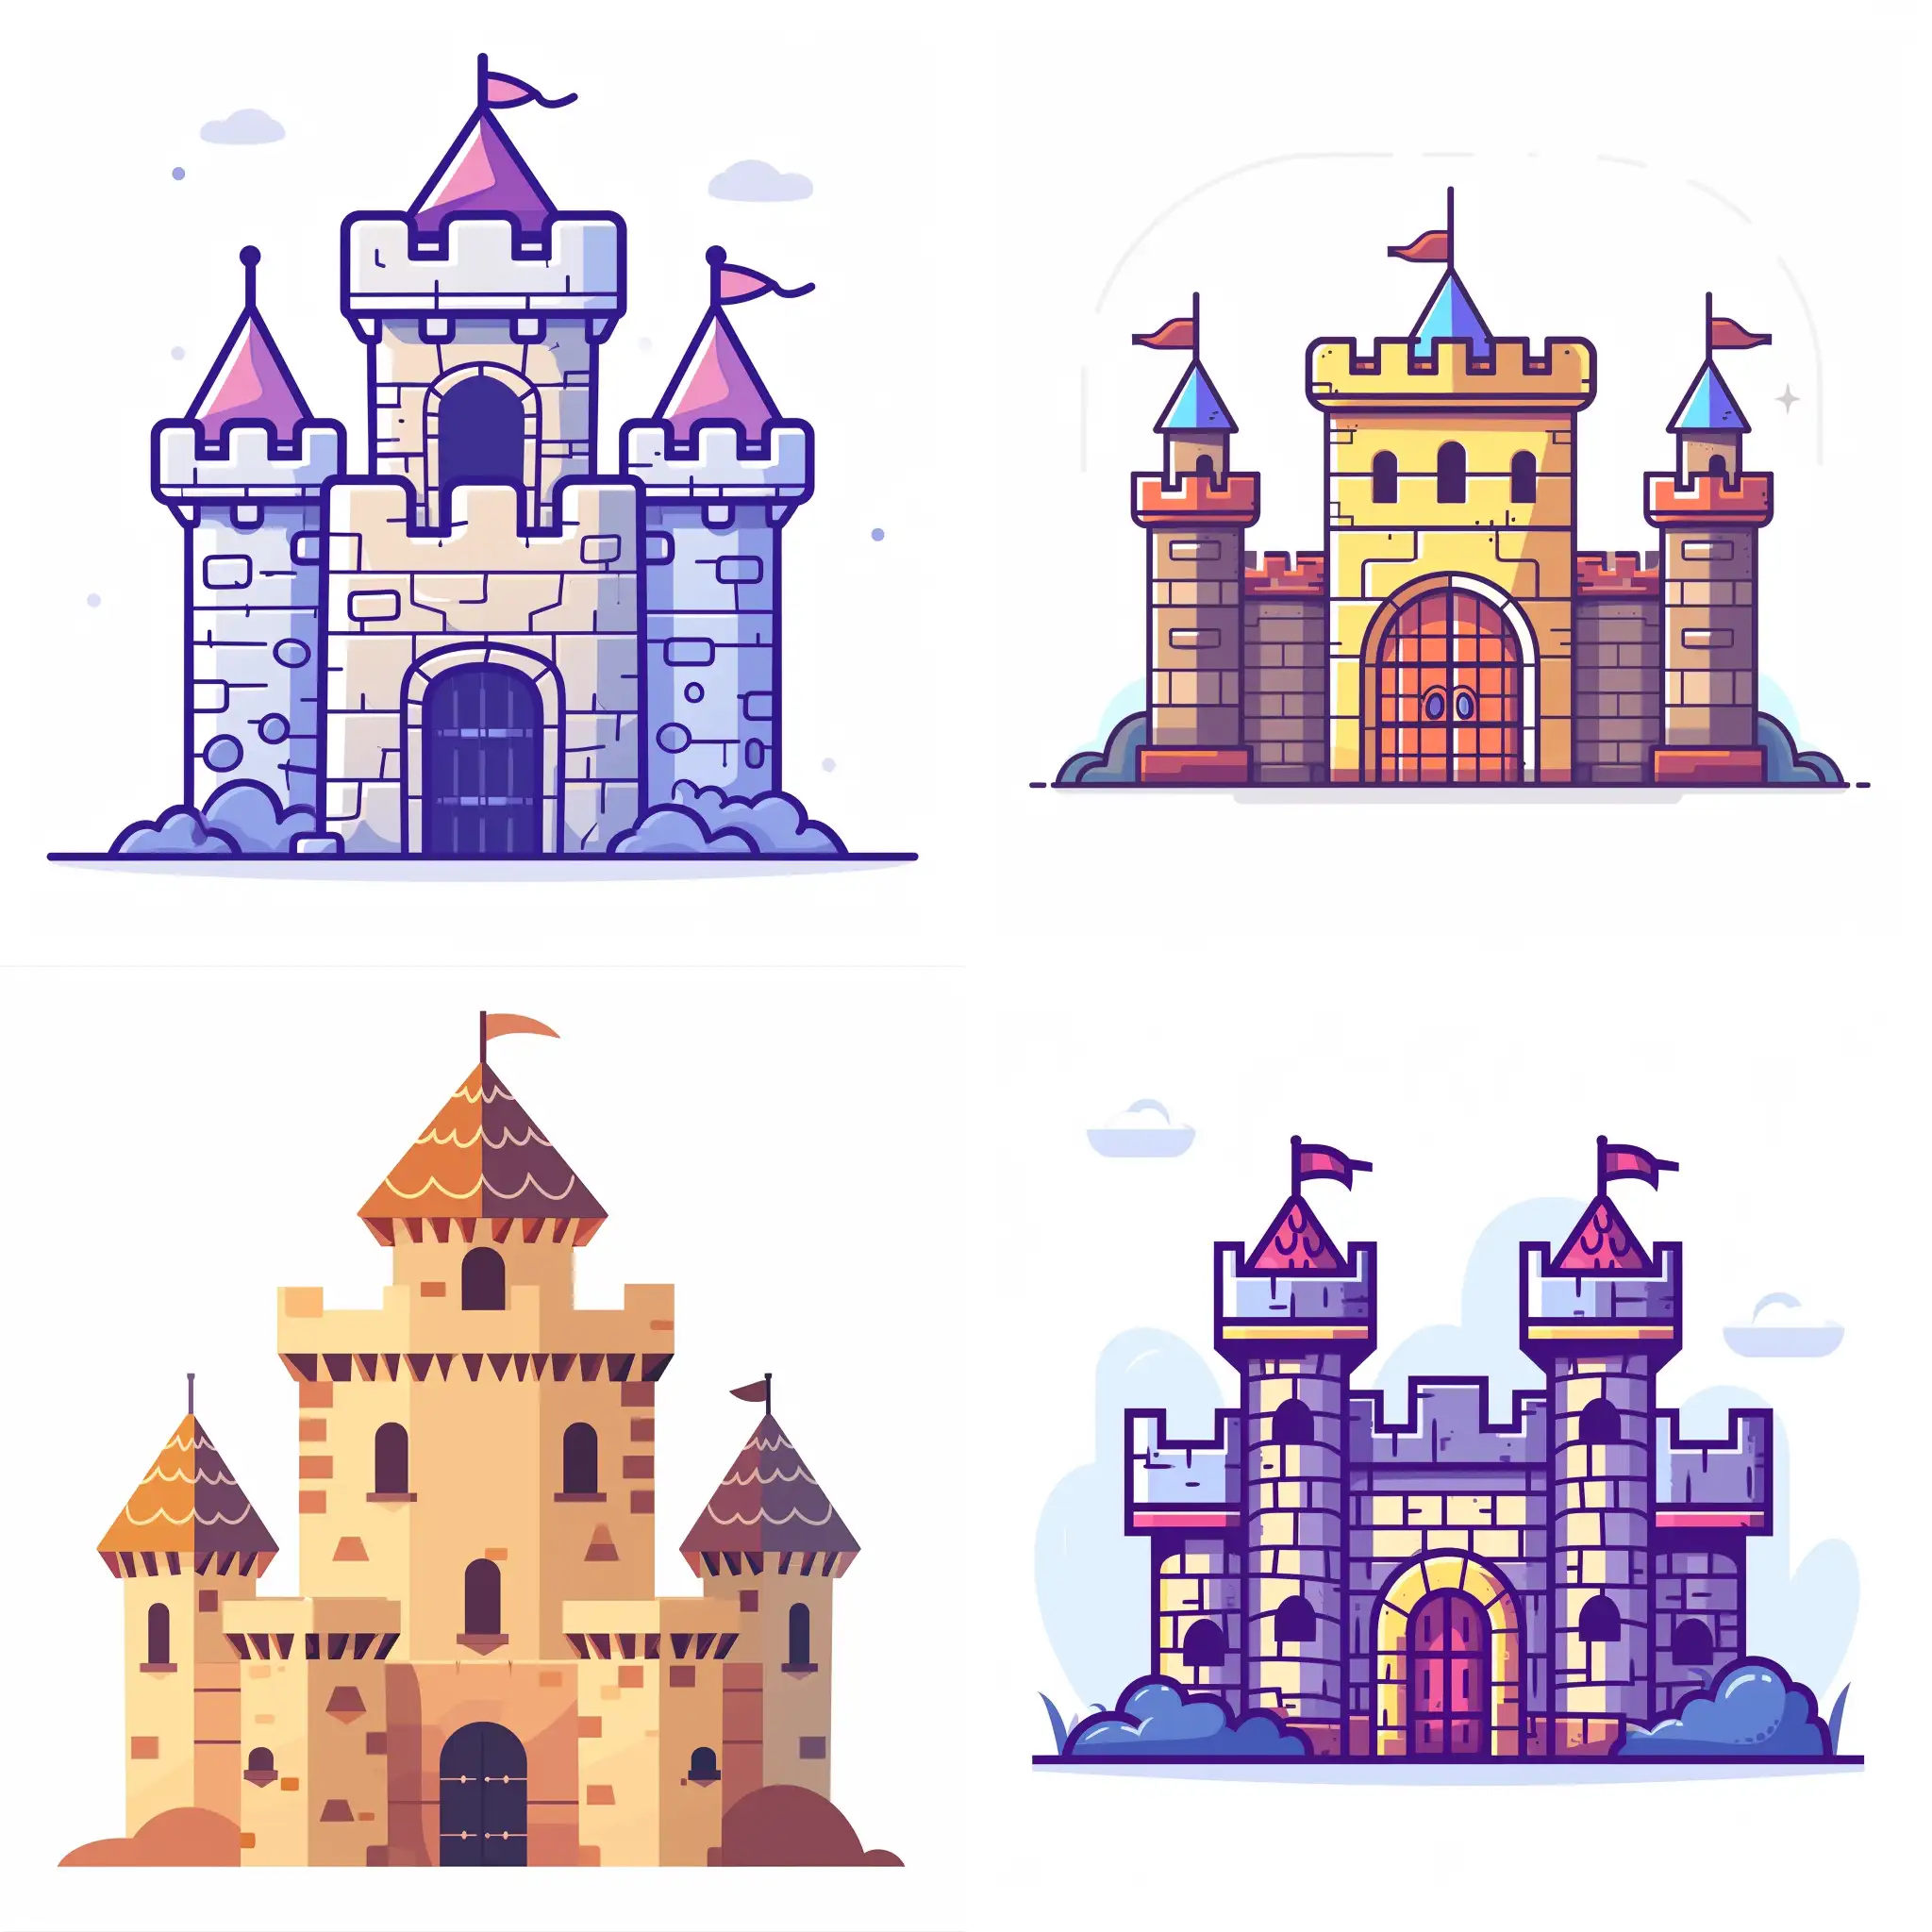 illustration a minimal graphic image about choosing powerful password for website. imagine a castle which has strong defence with concept of powerful password for admins of website with plain white background (Code: FFFF)